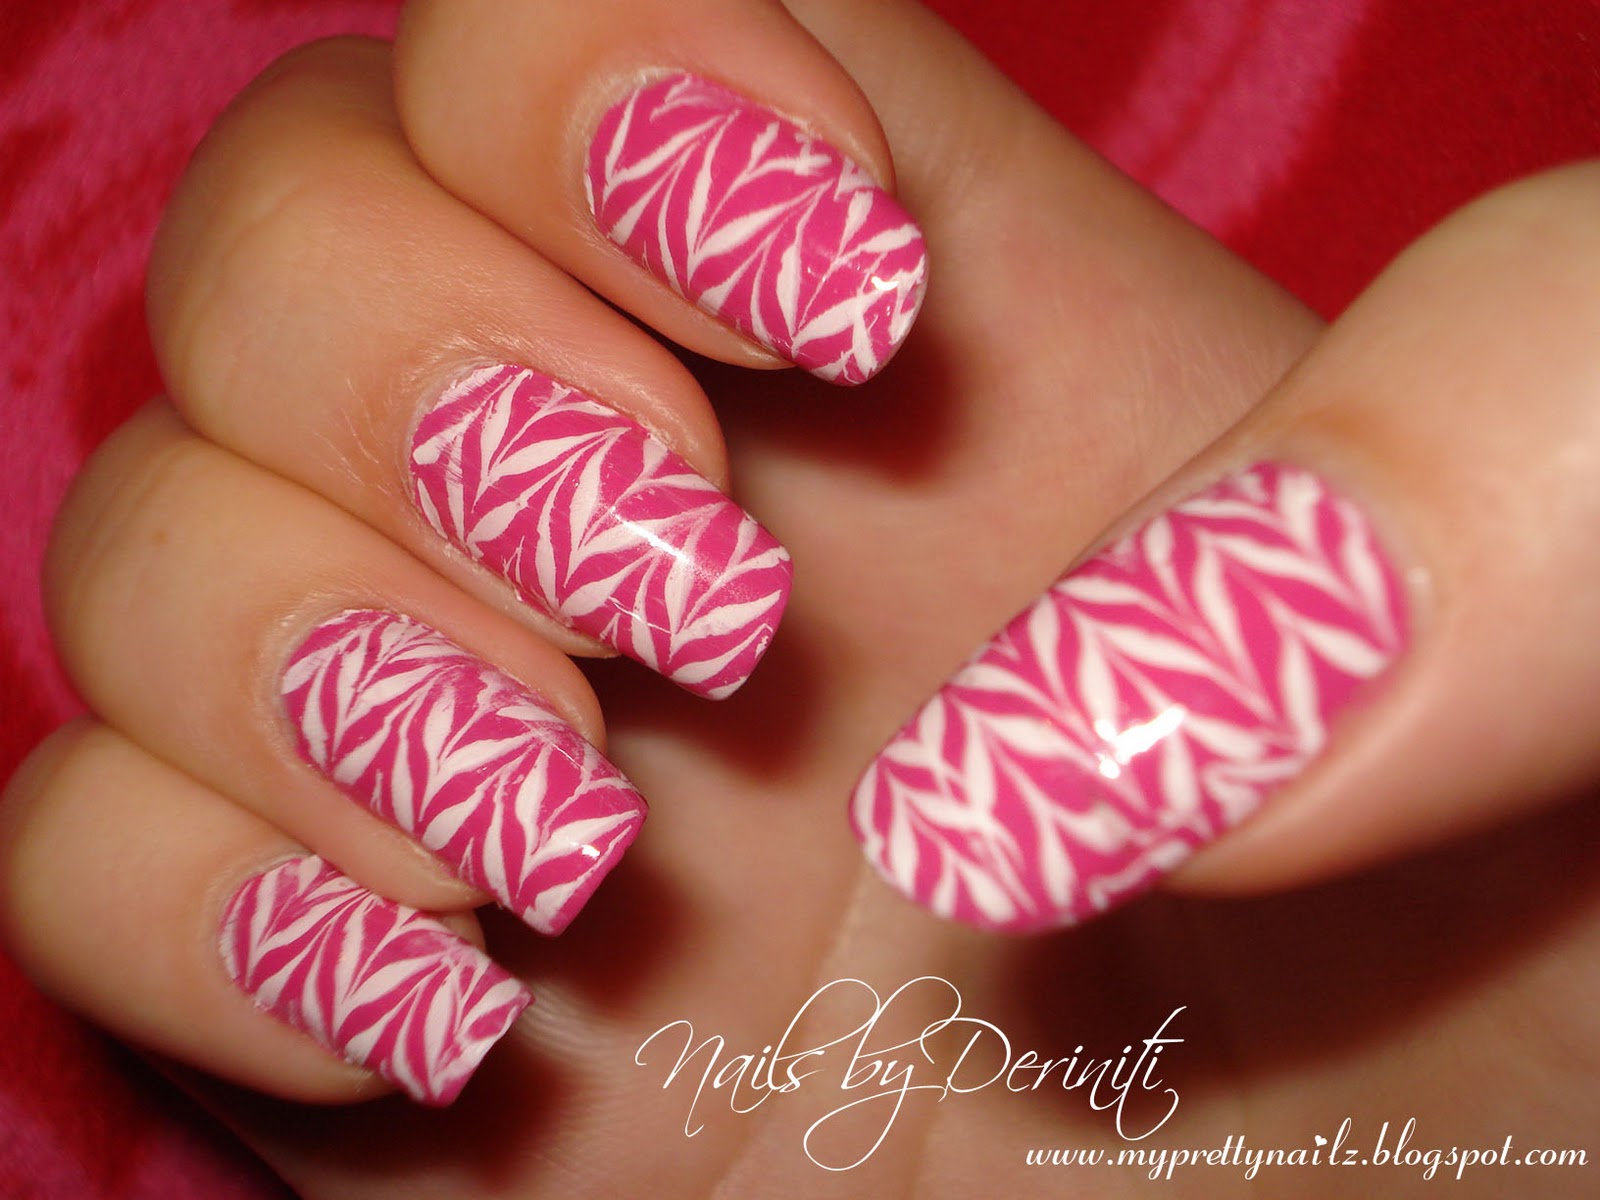 White and Pink Nail Art on Pinterest - wide 5